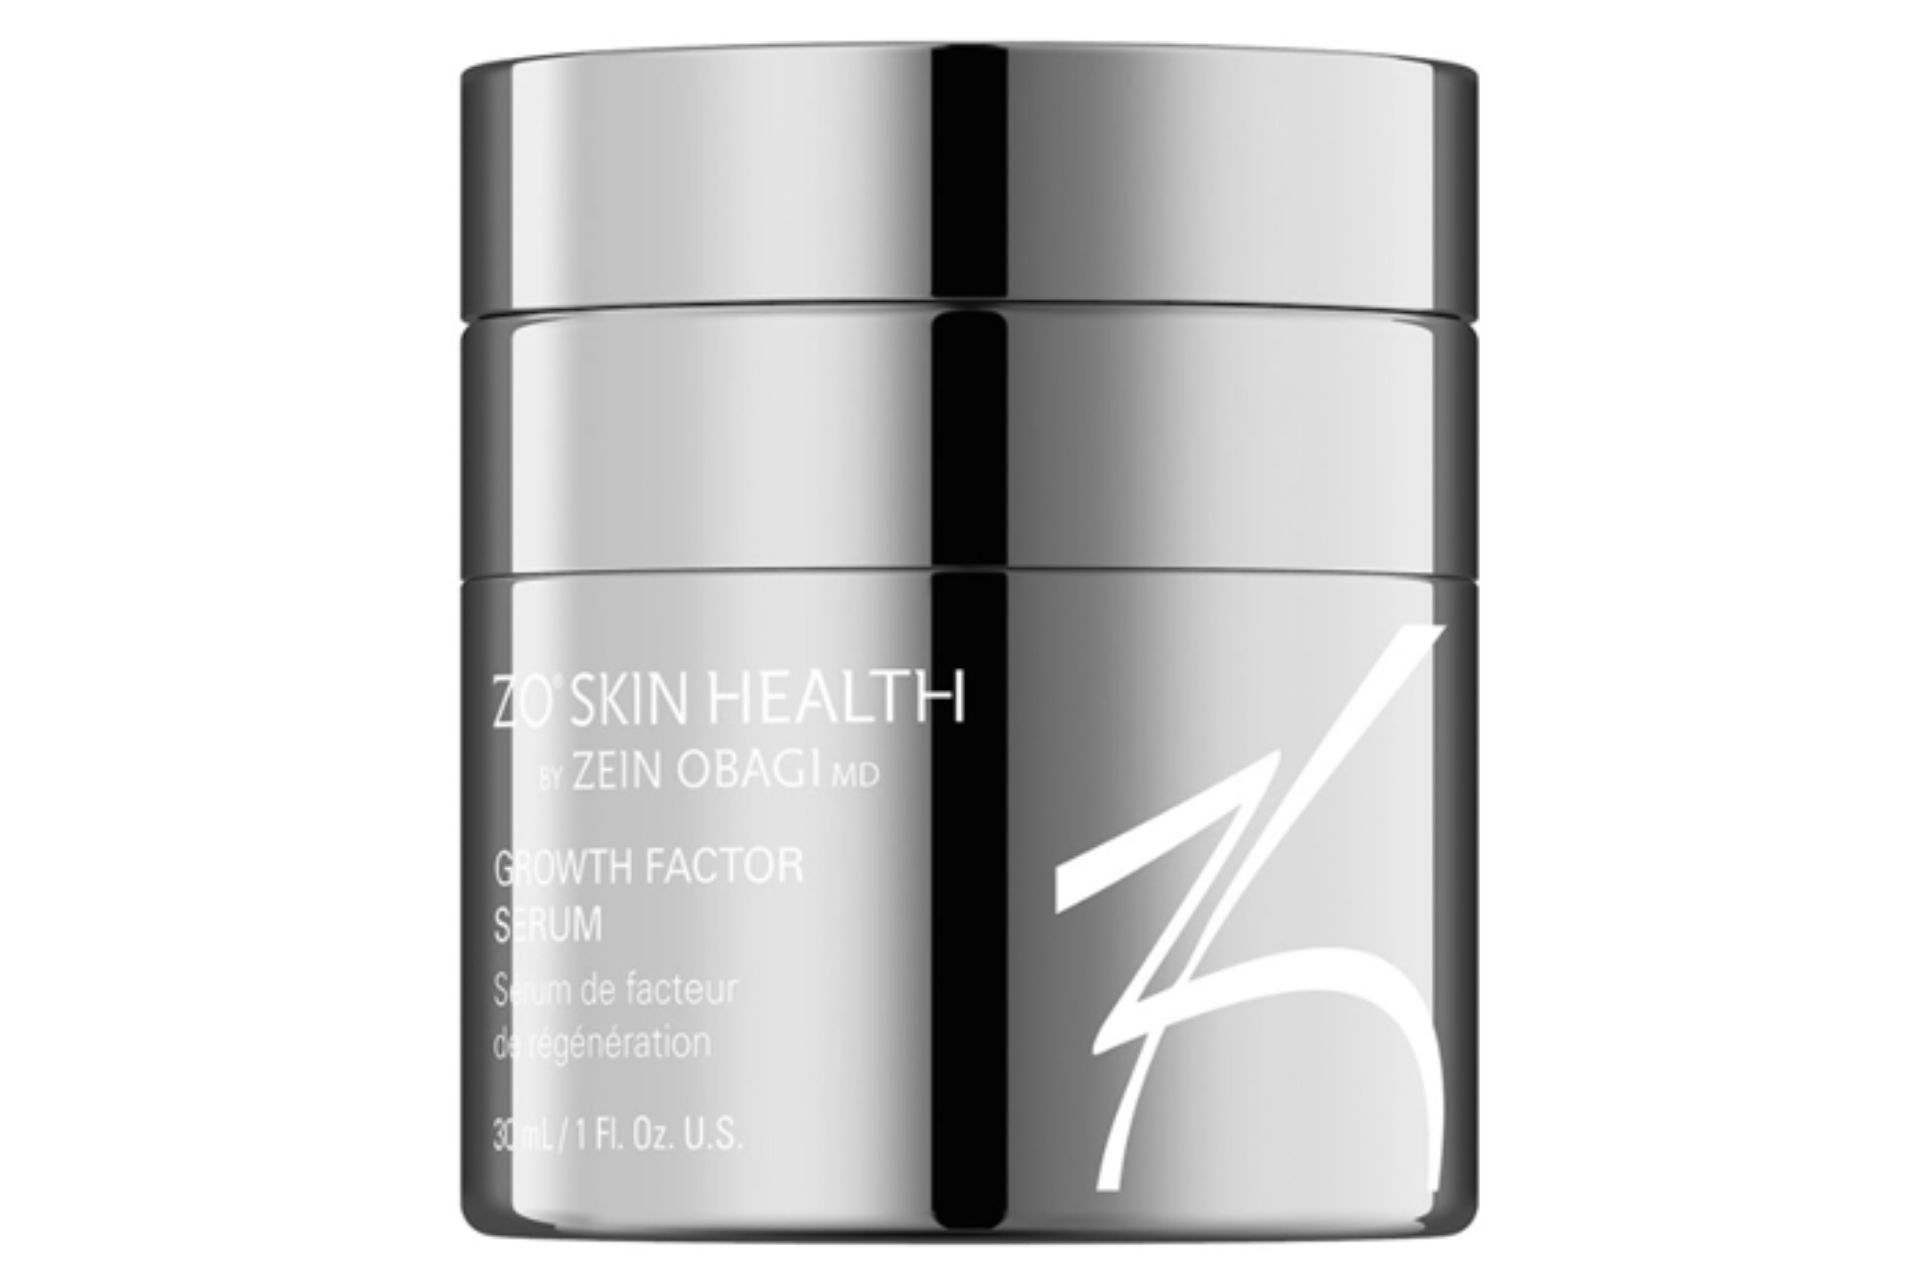 A close-up of ZO Skin Health Growth Factor Serum